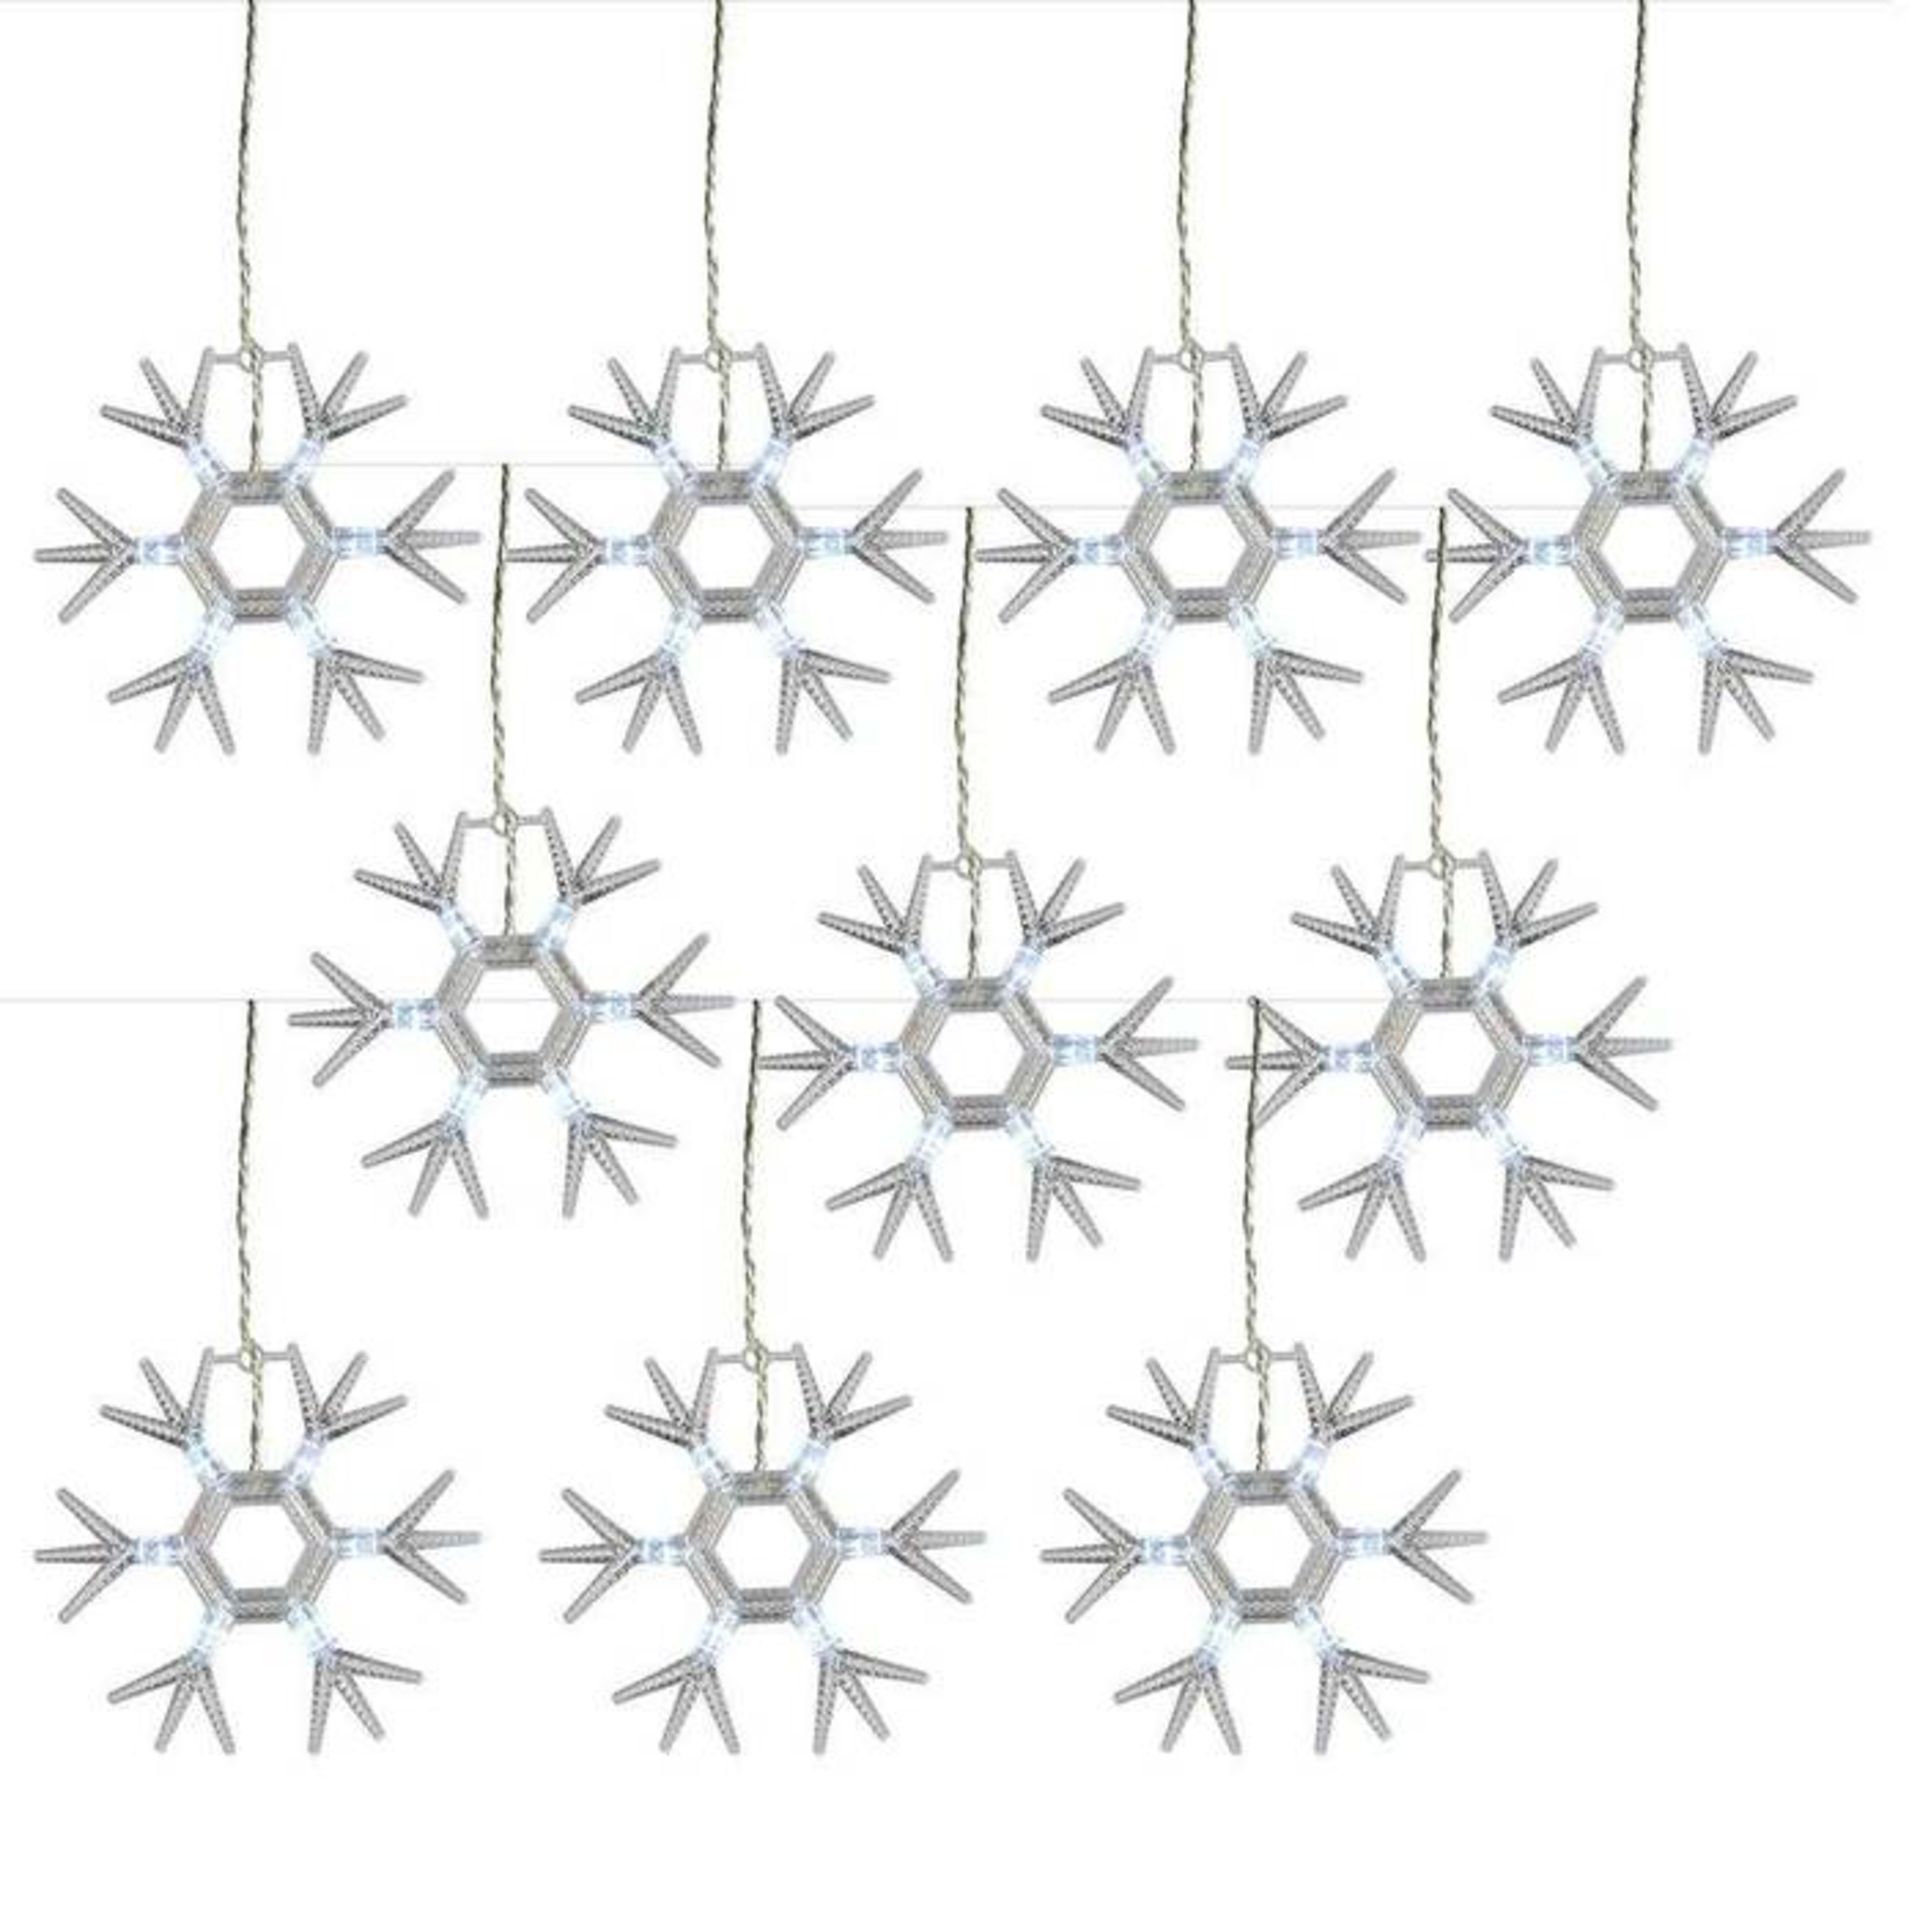 10 Acrylic Snowflakes with 60 Bright White LED Lights - Image 2 of 4